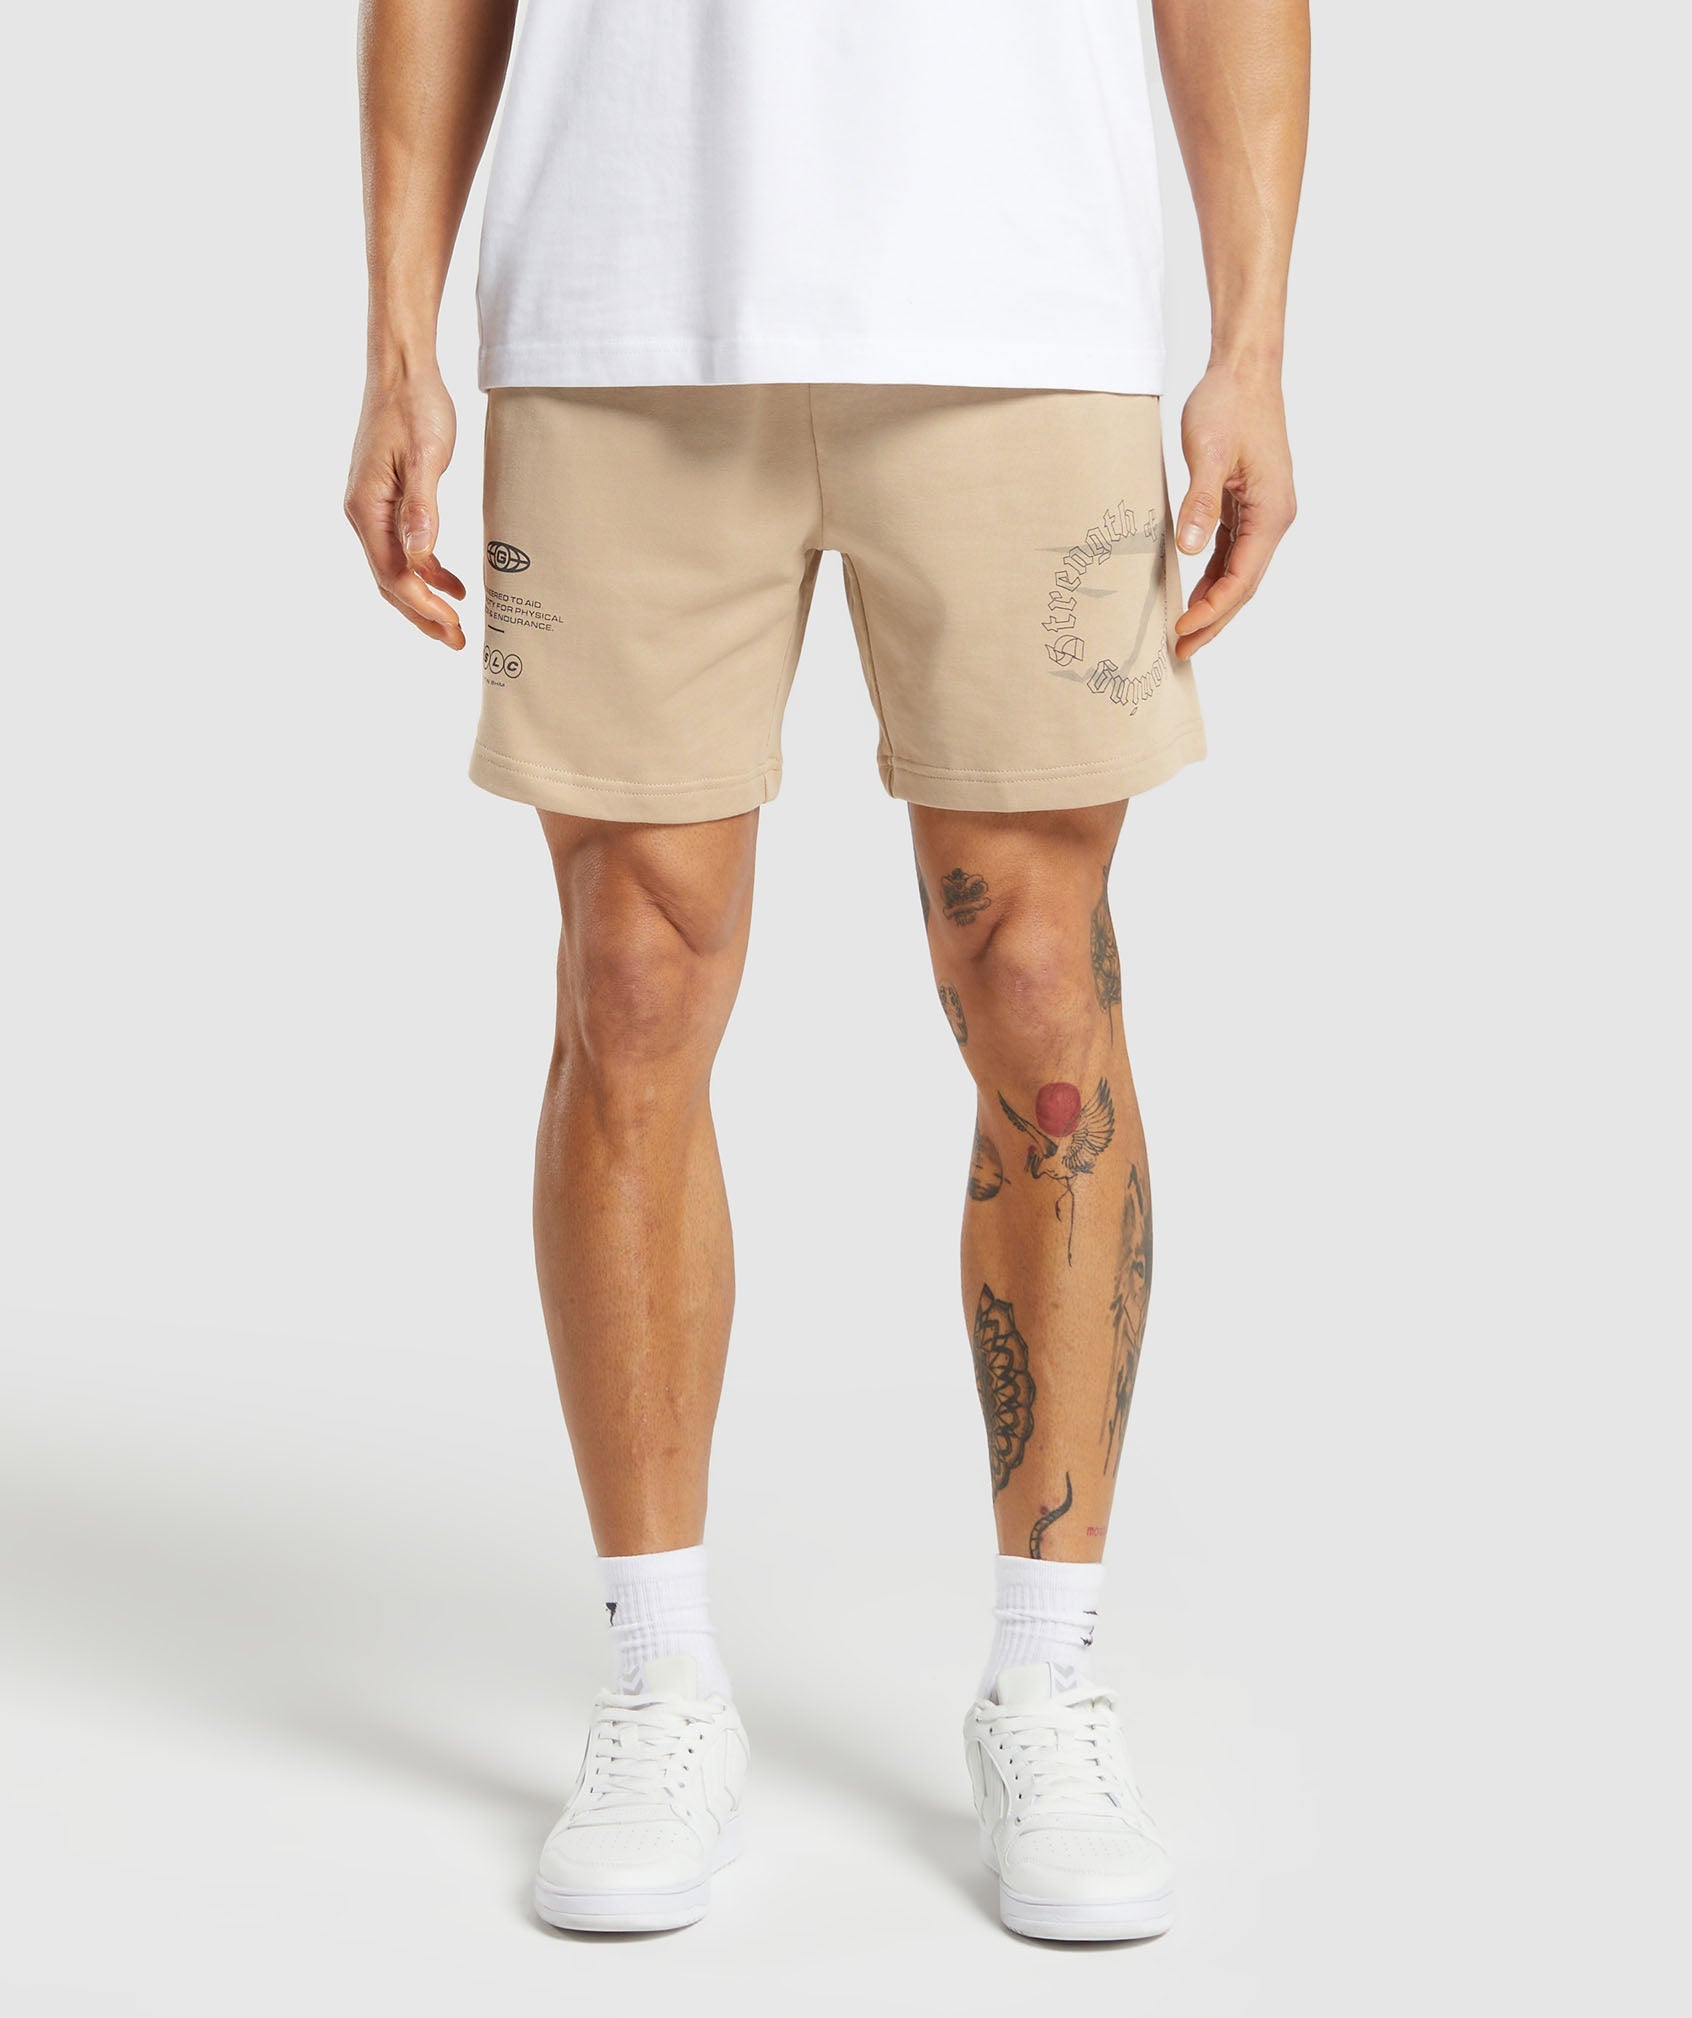 Strength and Conditioning 7" Shorts in Vanilla Beige - view 1